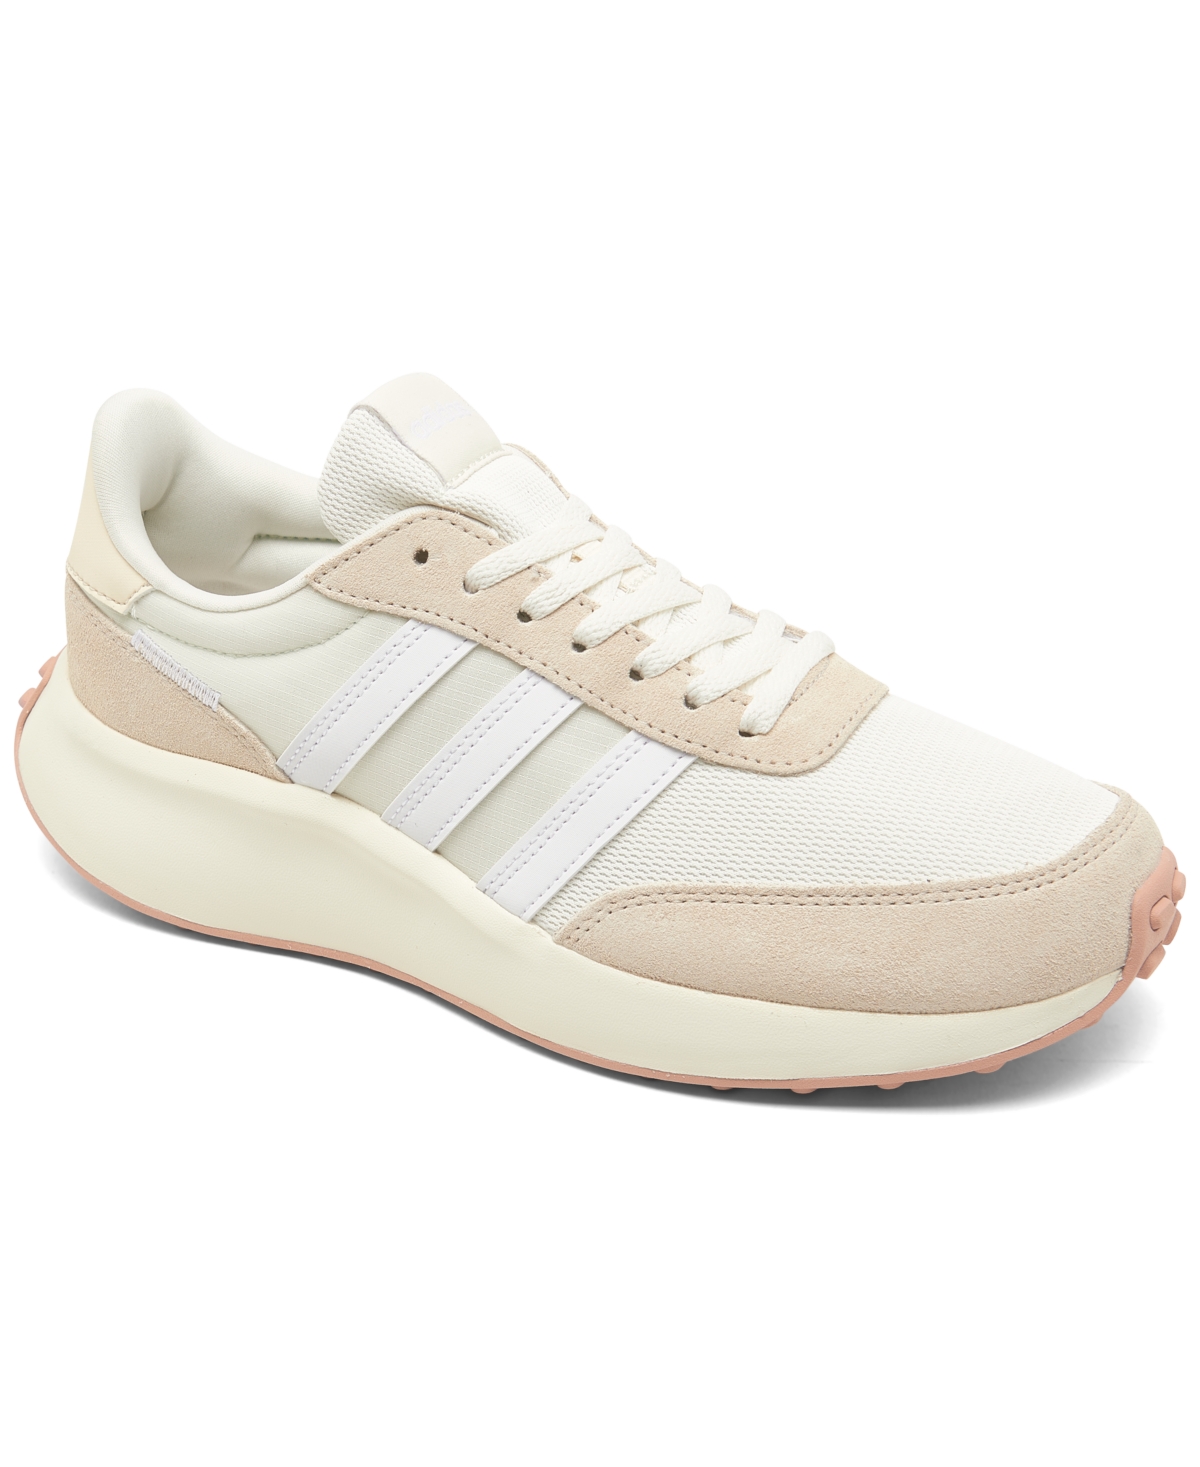 Adidas Originals Women's Run 70s Casual Sneakers From Finish Line In Off White,white